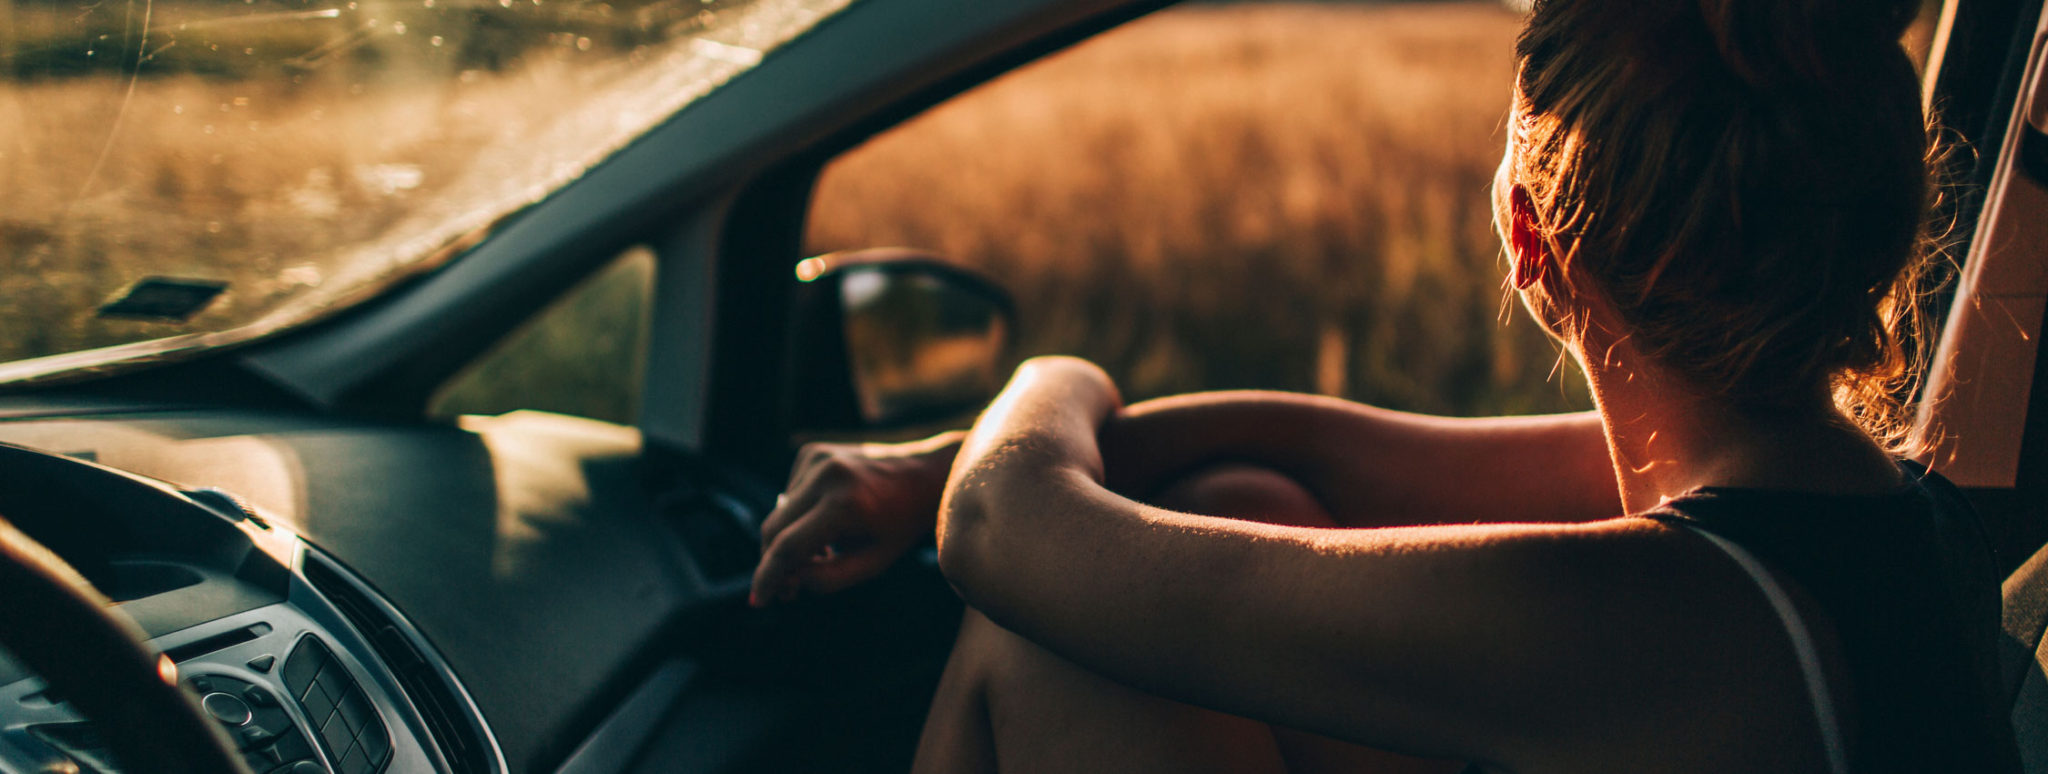 5 Mistakes to Avoid When Planning a Road Trip